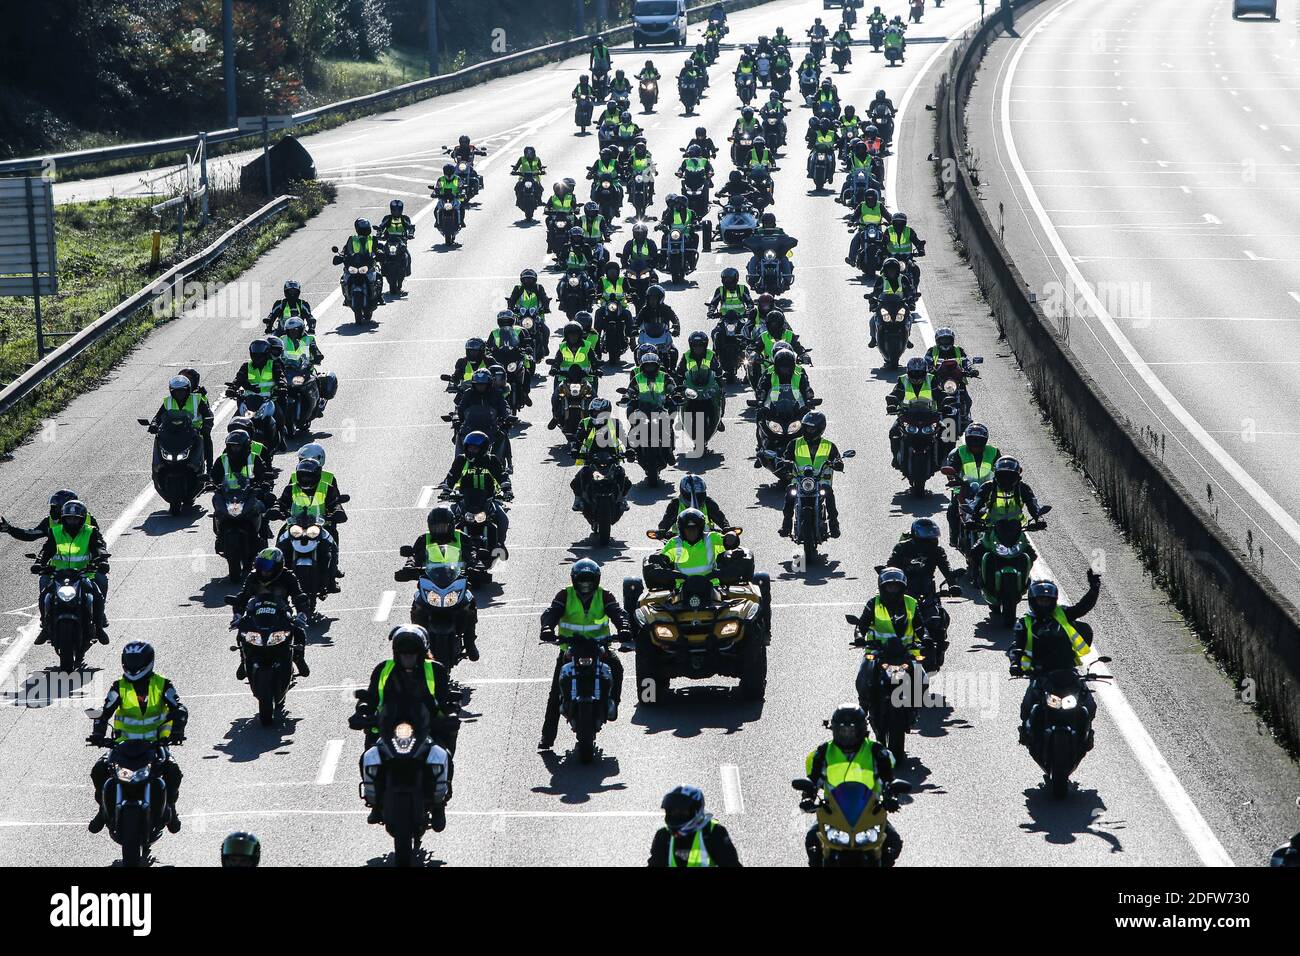 The participants of the "Yellow Vests" movement, during a go-slow operation on the Bordeaux ring road.on November 17, 2018 in Bordeaux, France. Photo by Thibaud MORITZ ABACAPRESS.COM Stock Photo